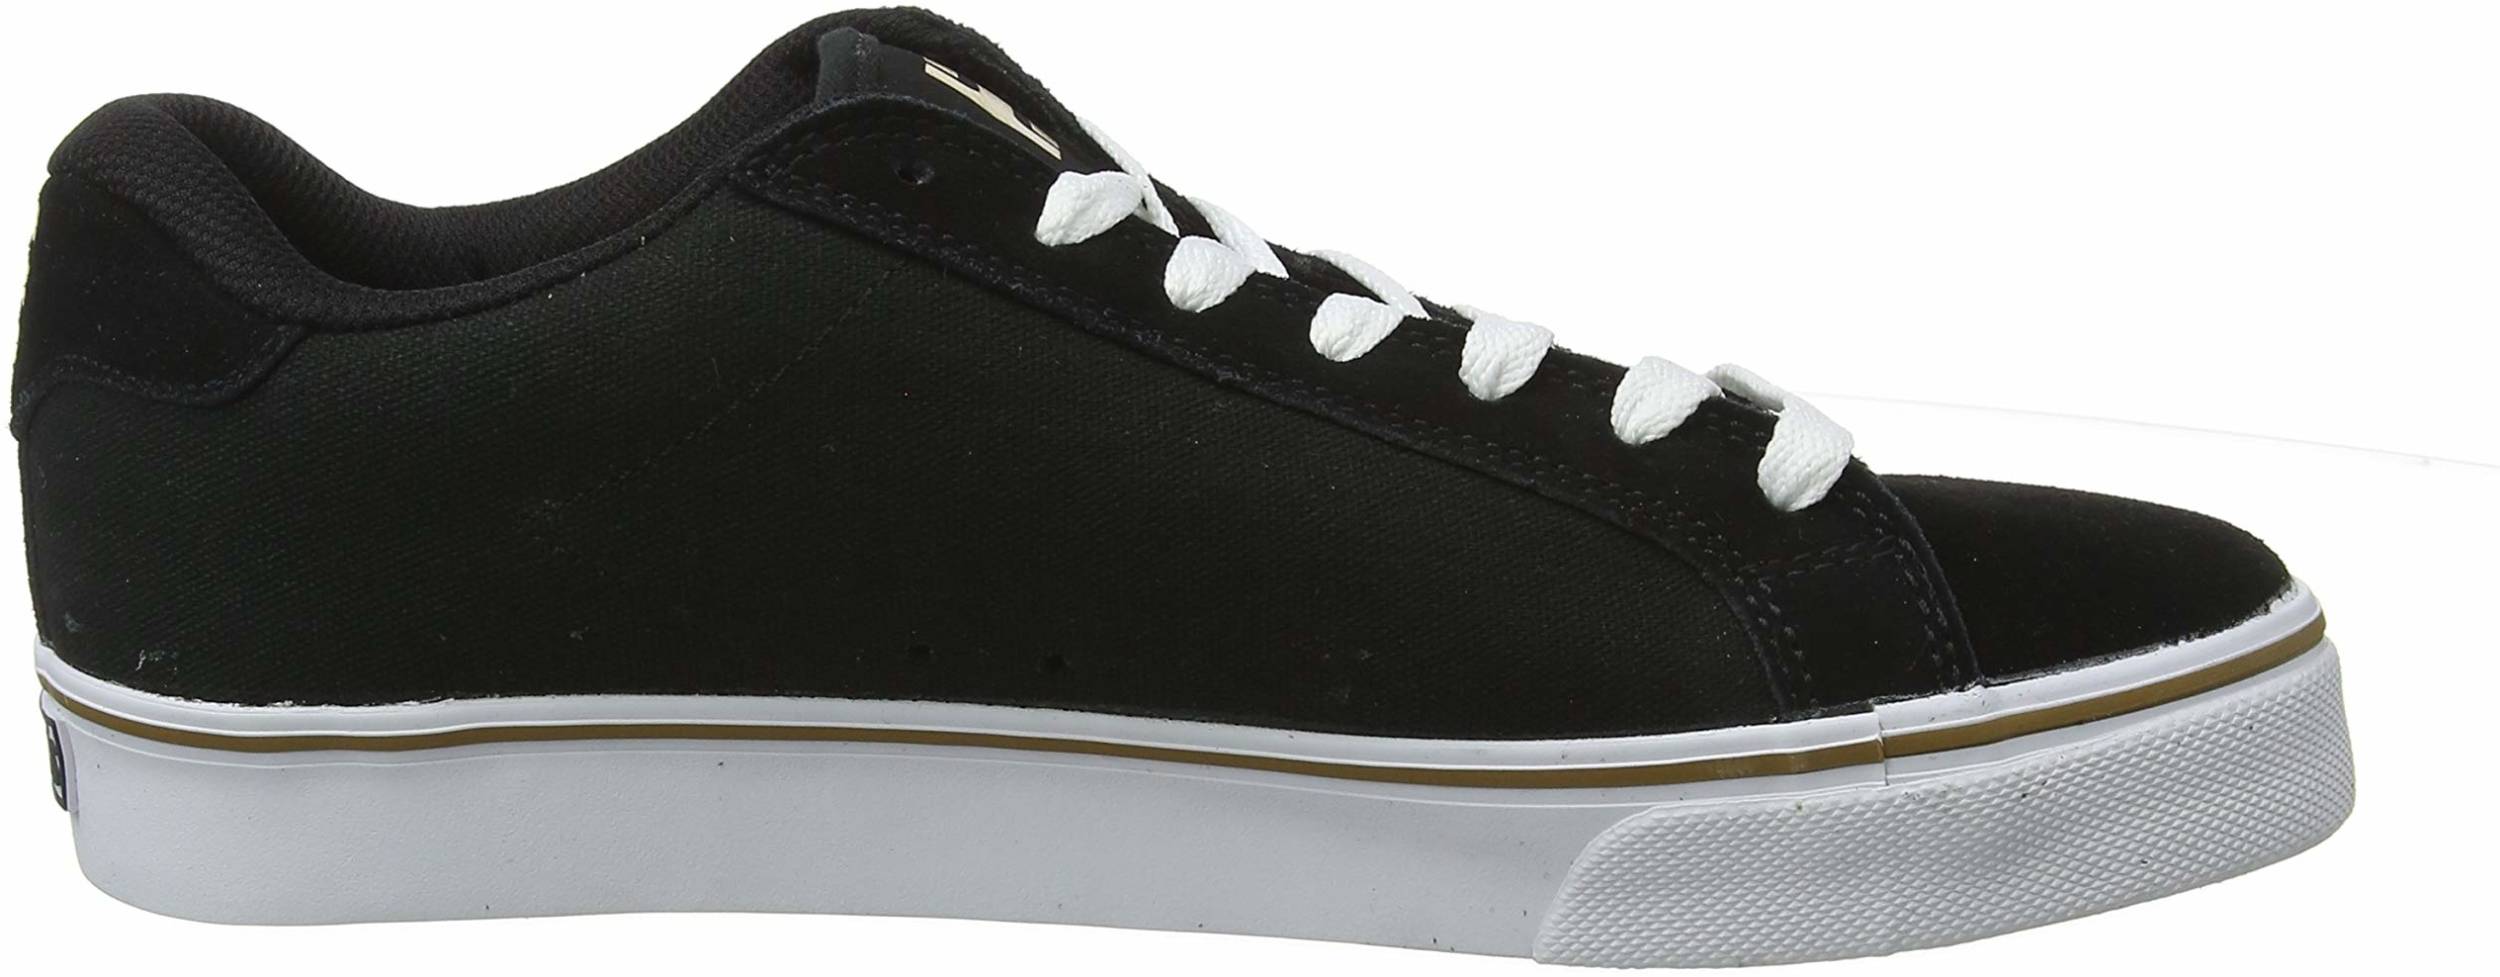 Only $42 + Review of Etnies Fader Vulc 